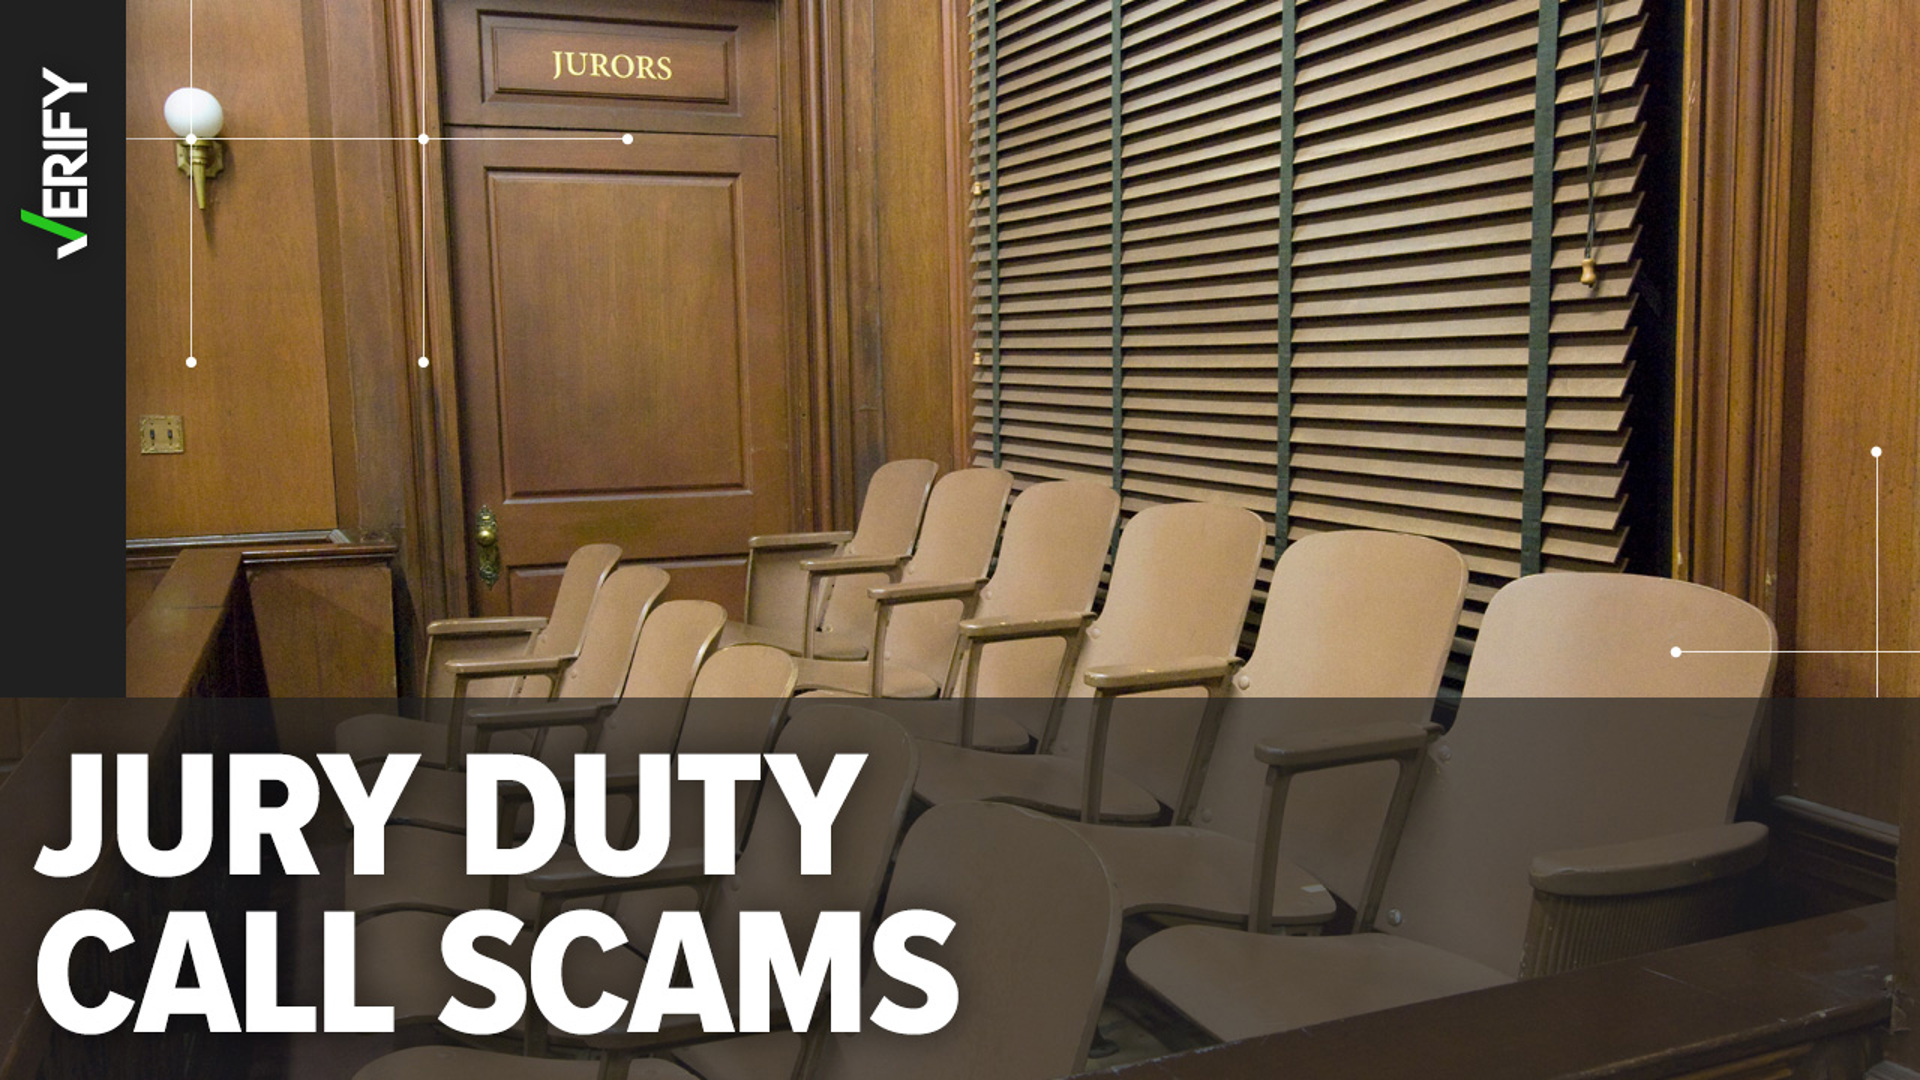 “If someone calls and threatens you to pay them to not be arrested for missing jury duty, you are being scammed,” U.S. Attorney Roger B. Handberg said.